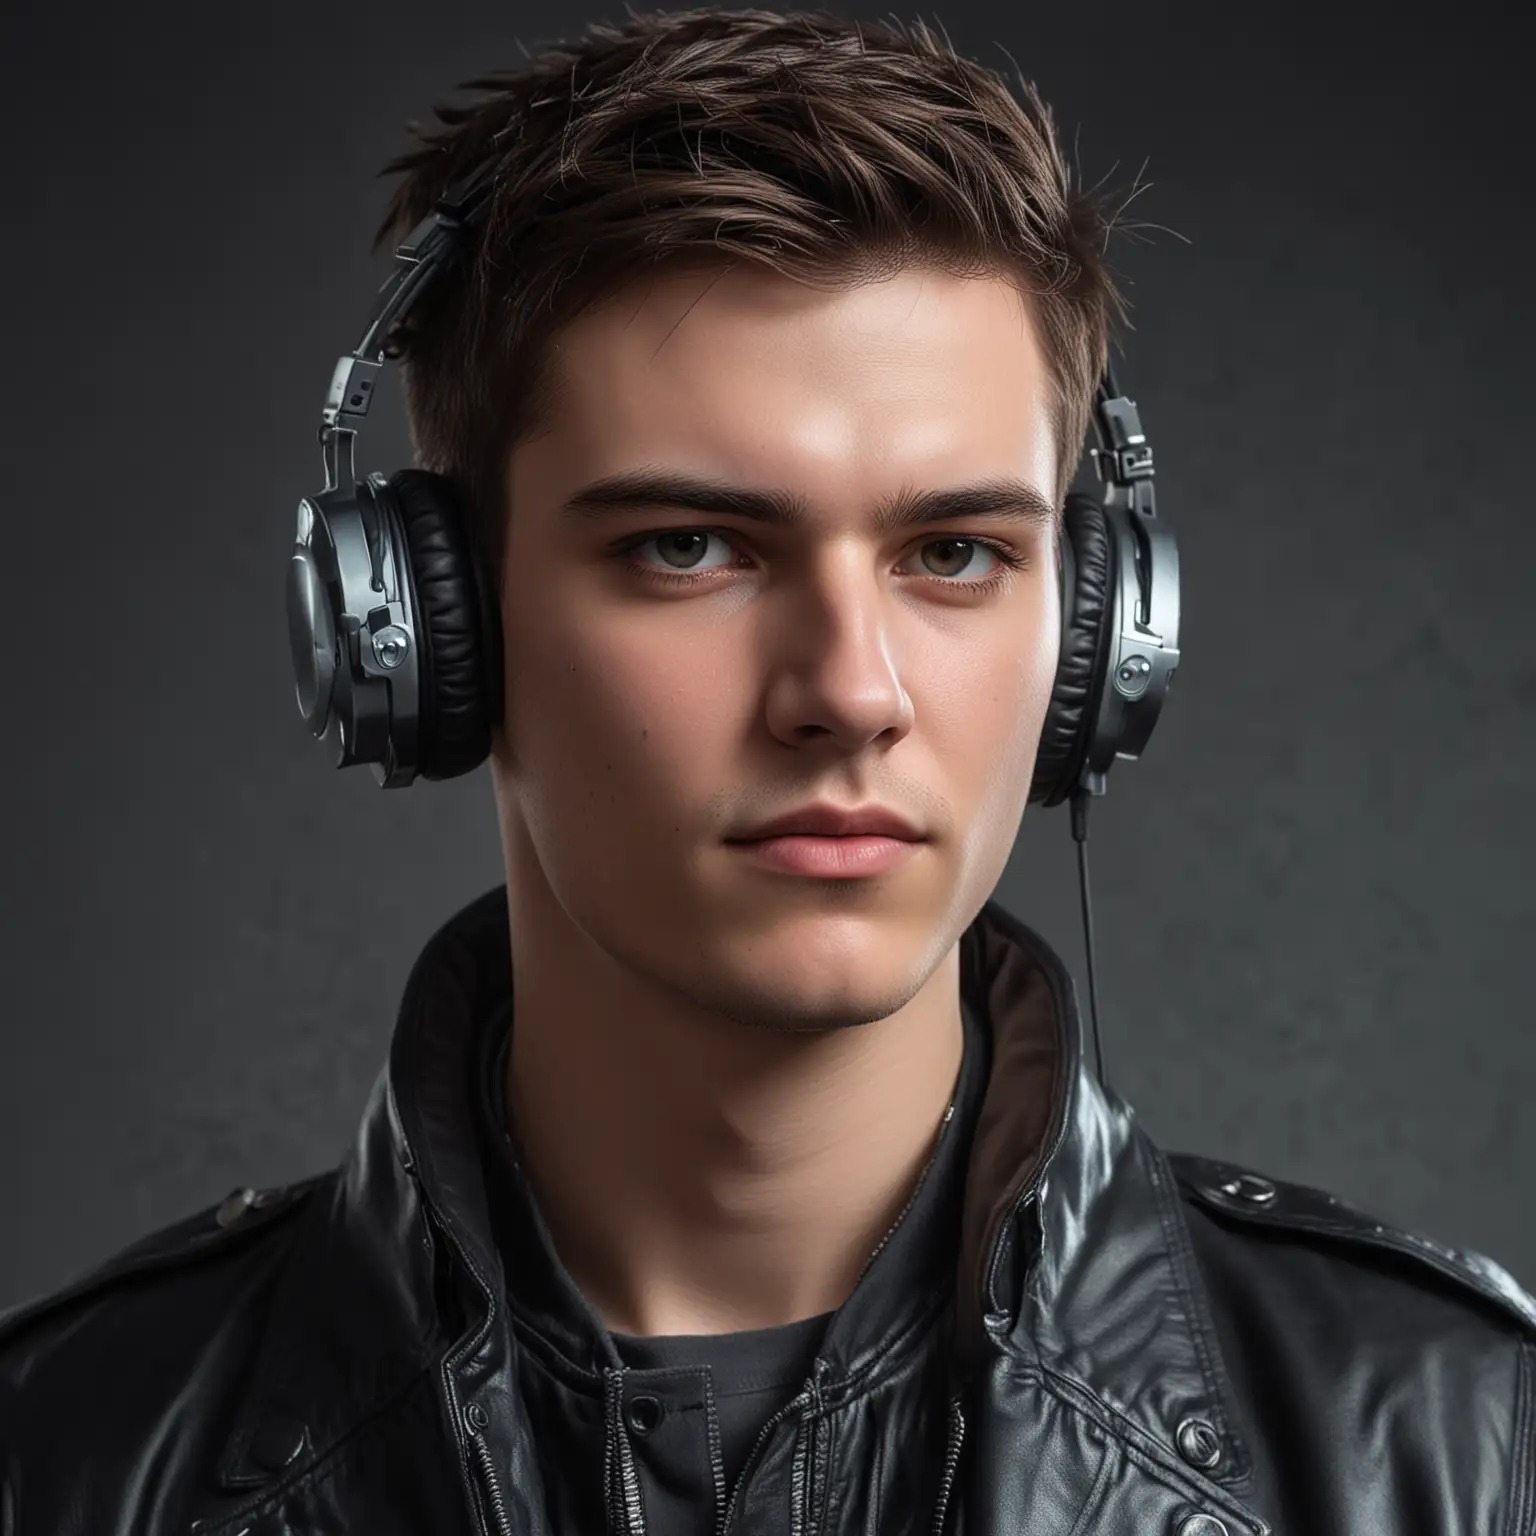 Cyberpunk-Style-American-Youth-with-Sony-Headphones-Playing-Games